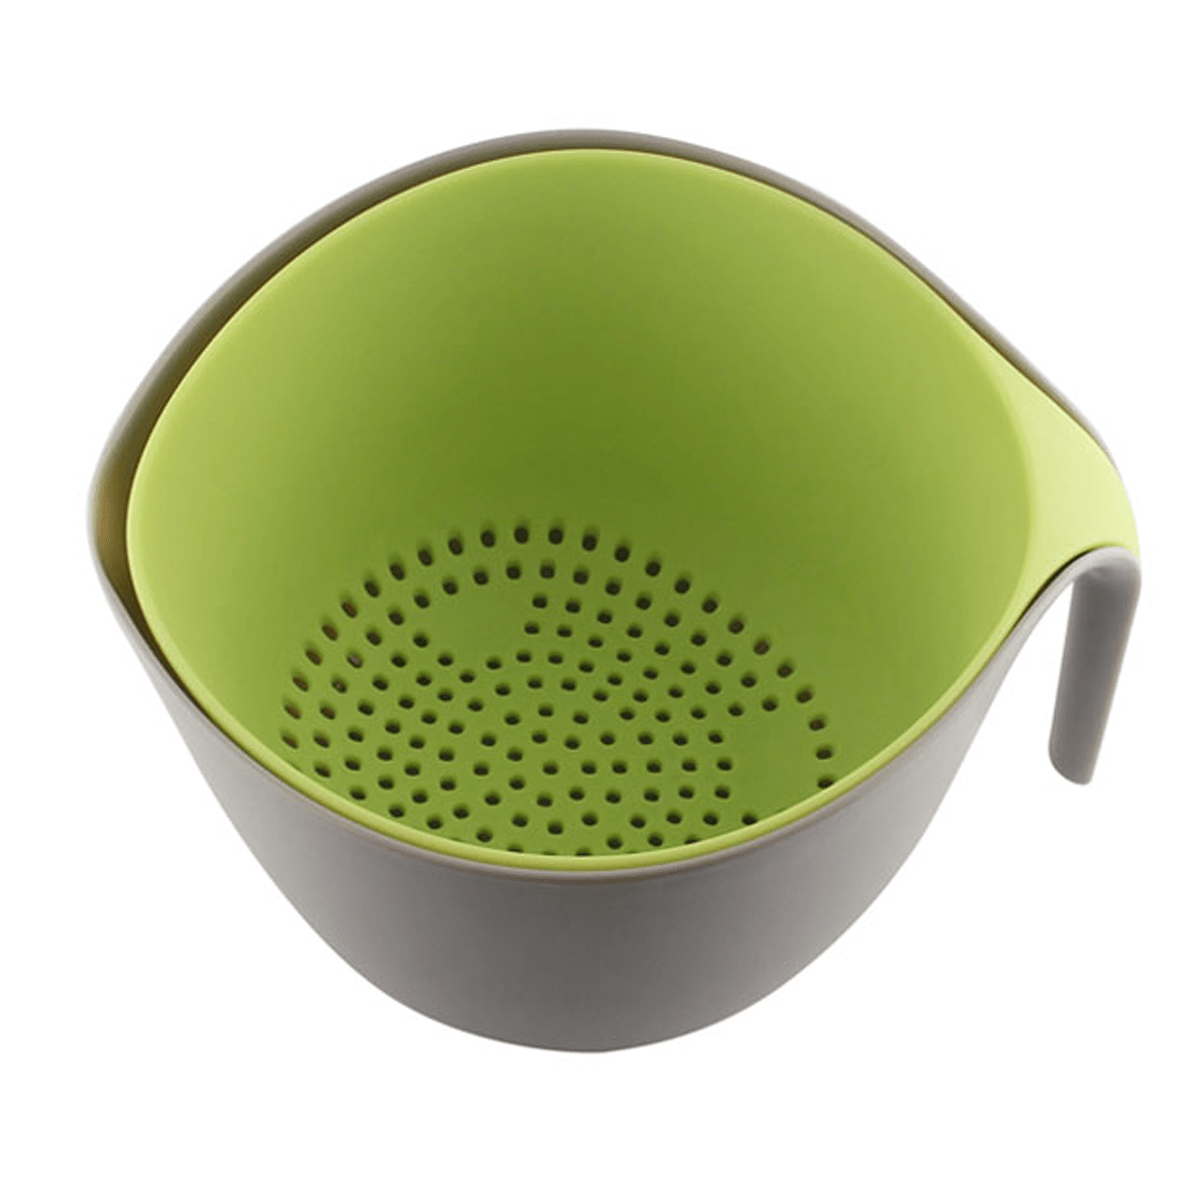 2 pcs easy grip heavy plastic colander and mixing bowl